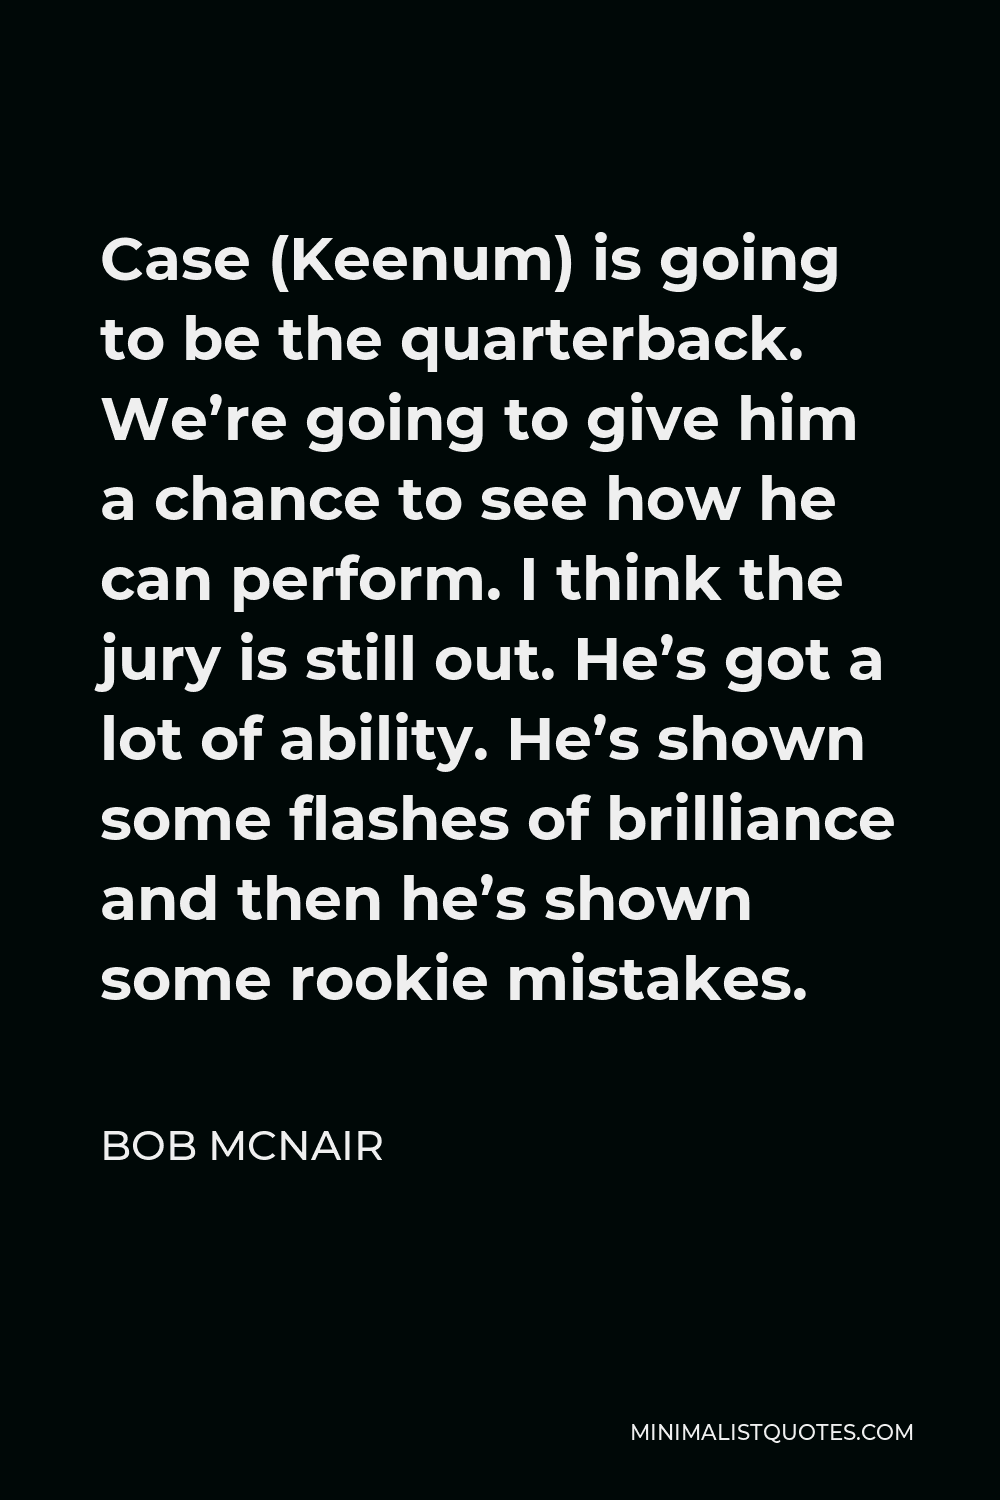 Bob McNair Quote - Case (Keenum) is going to be the quarterback. We’re going to give him a chance to see how he can perform. I think the jury is still out. He’s got a lot of ability. He’s shown some flashes of brilliance and then he’s shown some rookie mistakes.